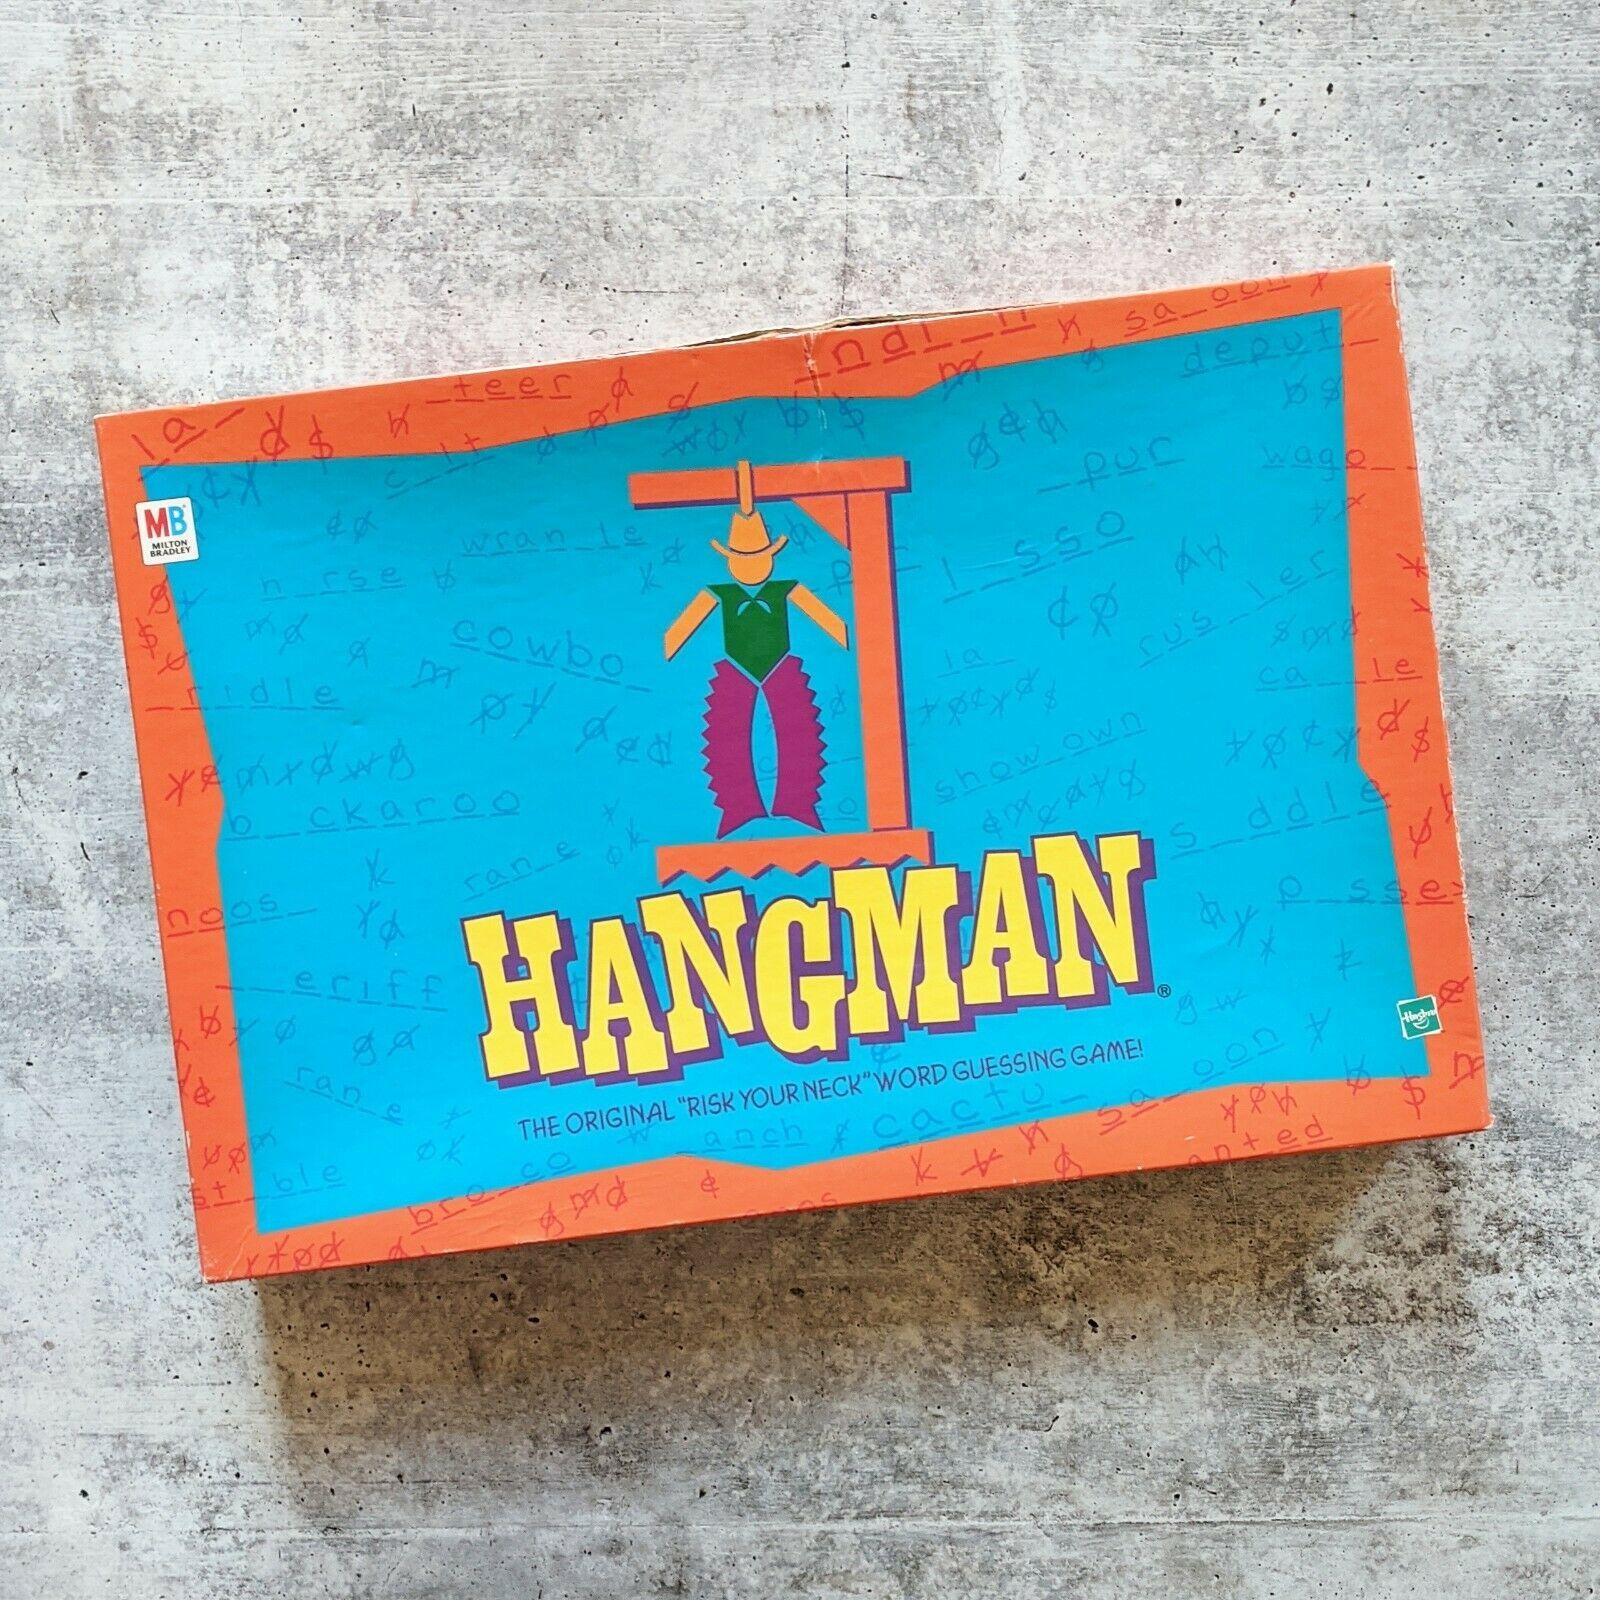 1999 Hangman “Risk Your Neck” Word Guessing Game By Milton Bradley ~ COMPLETE - $14.84